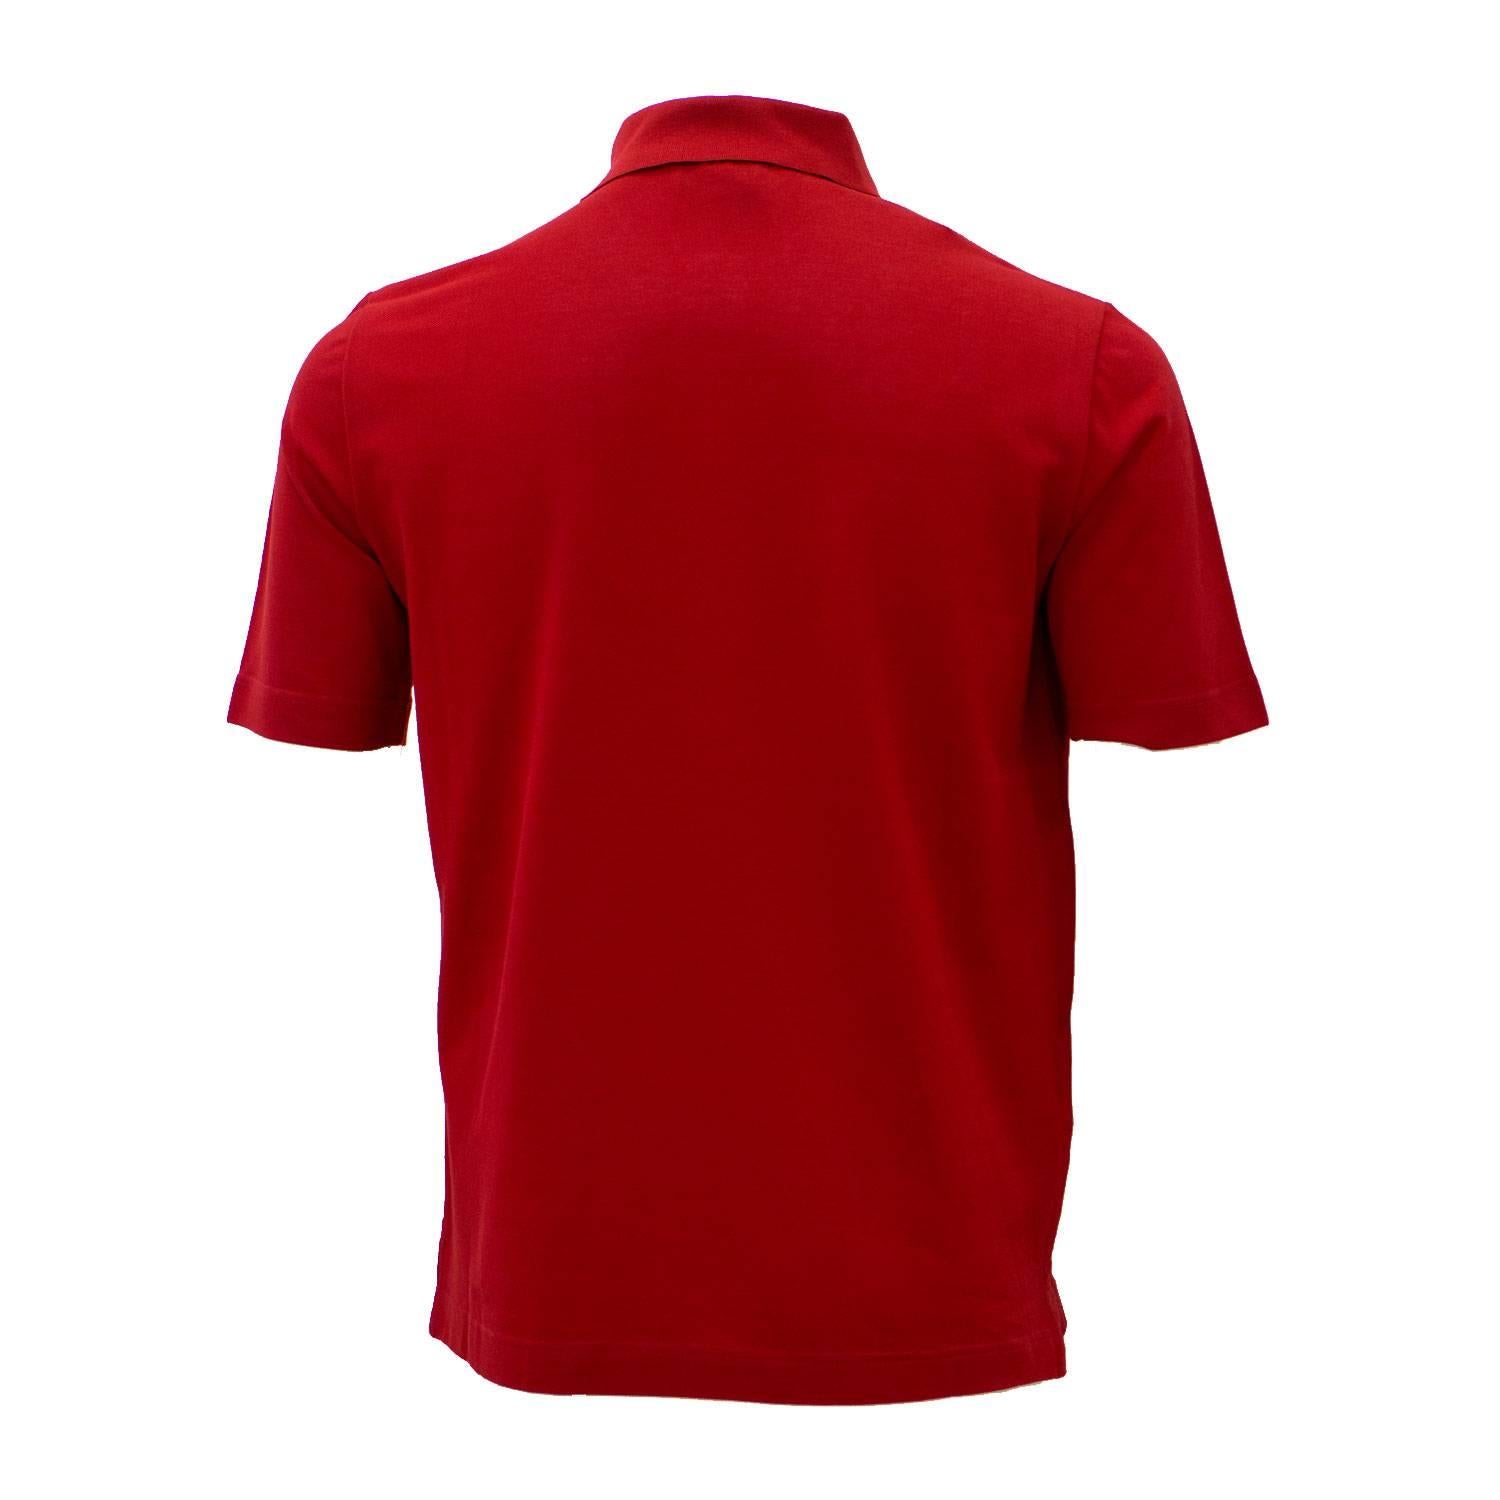 Hermes Polo Boutonne Pique Cotton Size M Color Rouge Vif 2016.

Pre-owned and never used.

Bought it in hermes store in 2016.

Size; ME

Composition: Cotton.

Color; Rouge Vif.

Model; Polo Boutonne Pique

Details: 
- Original